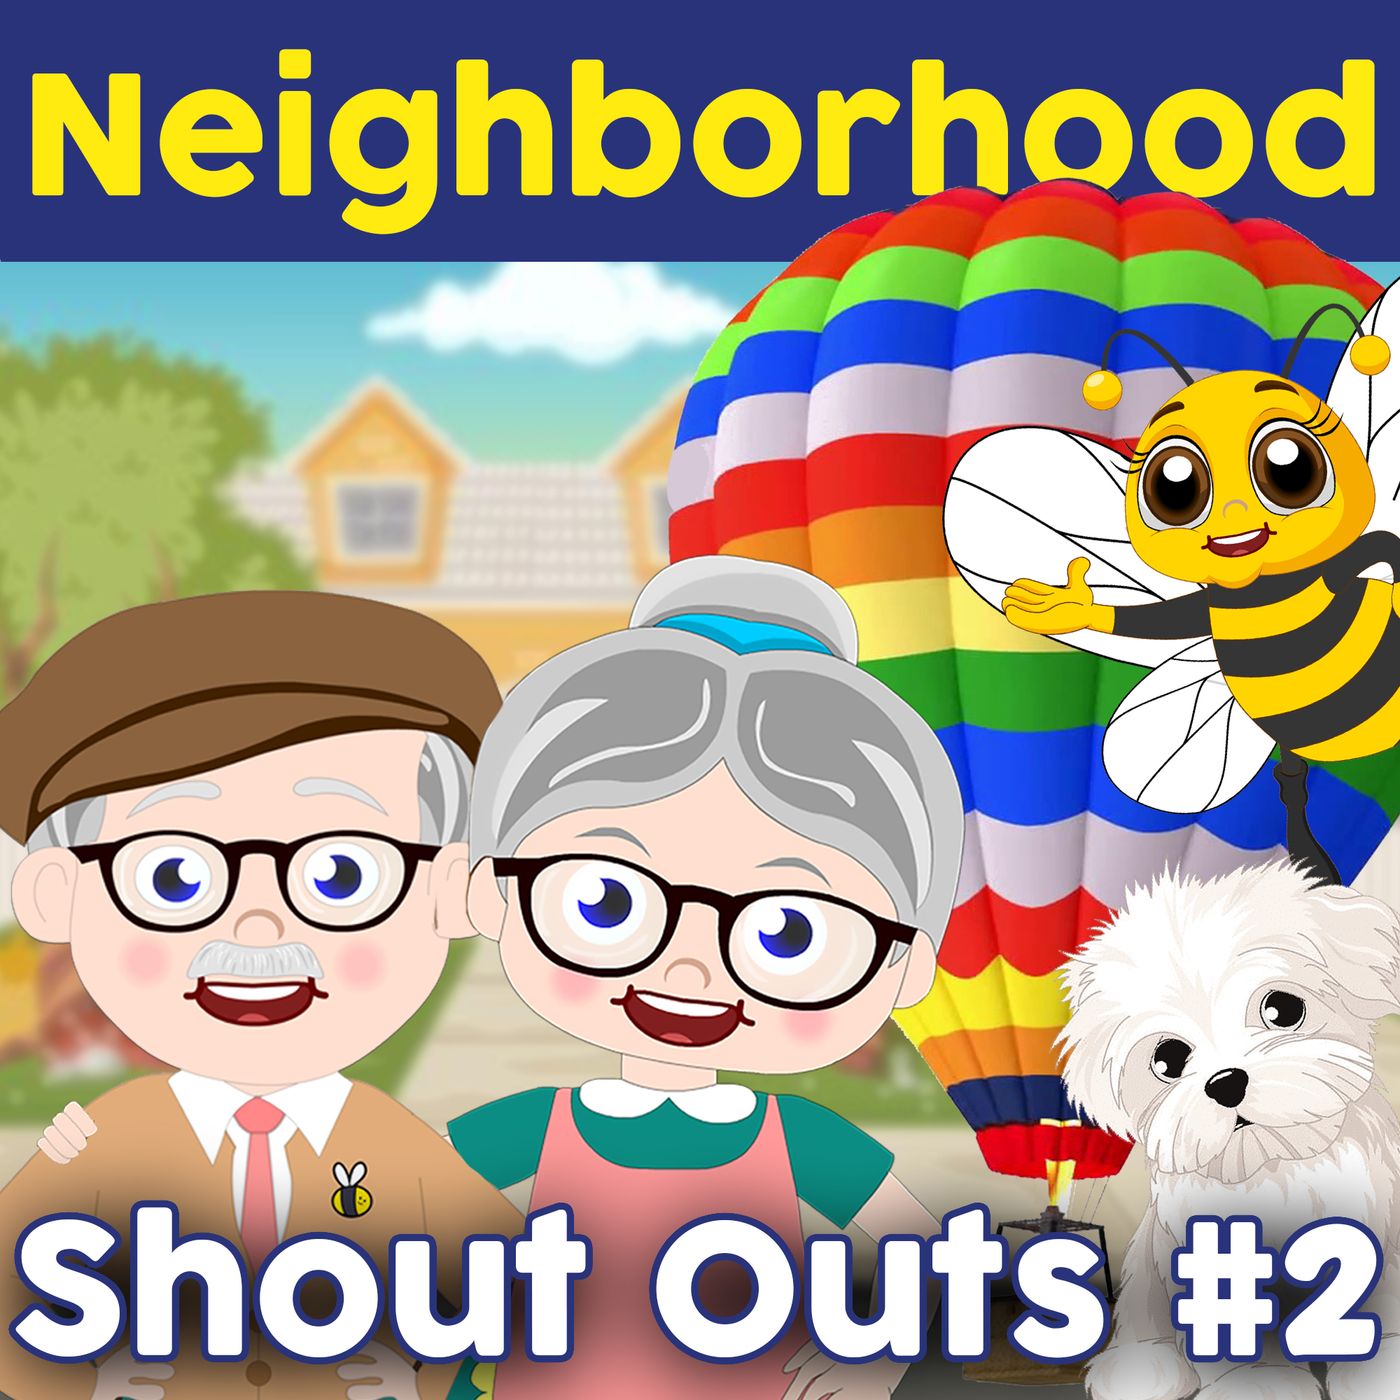 Honeybee "Shout Outs" Story #2